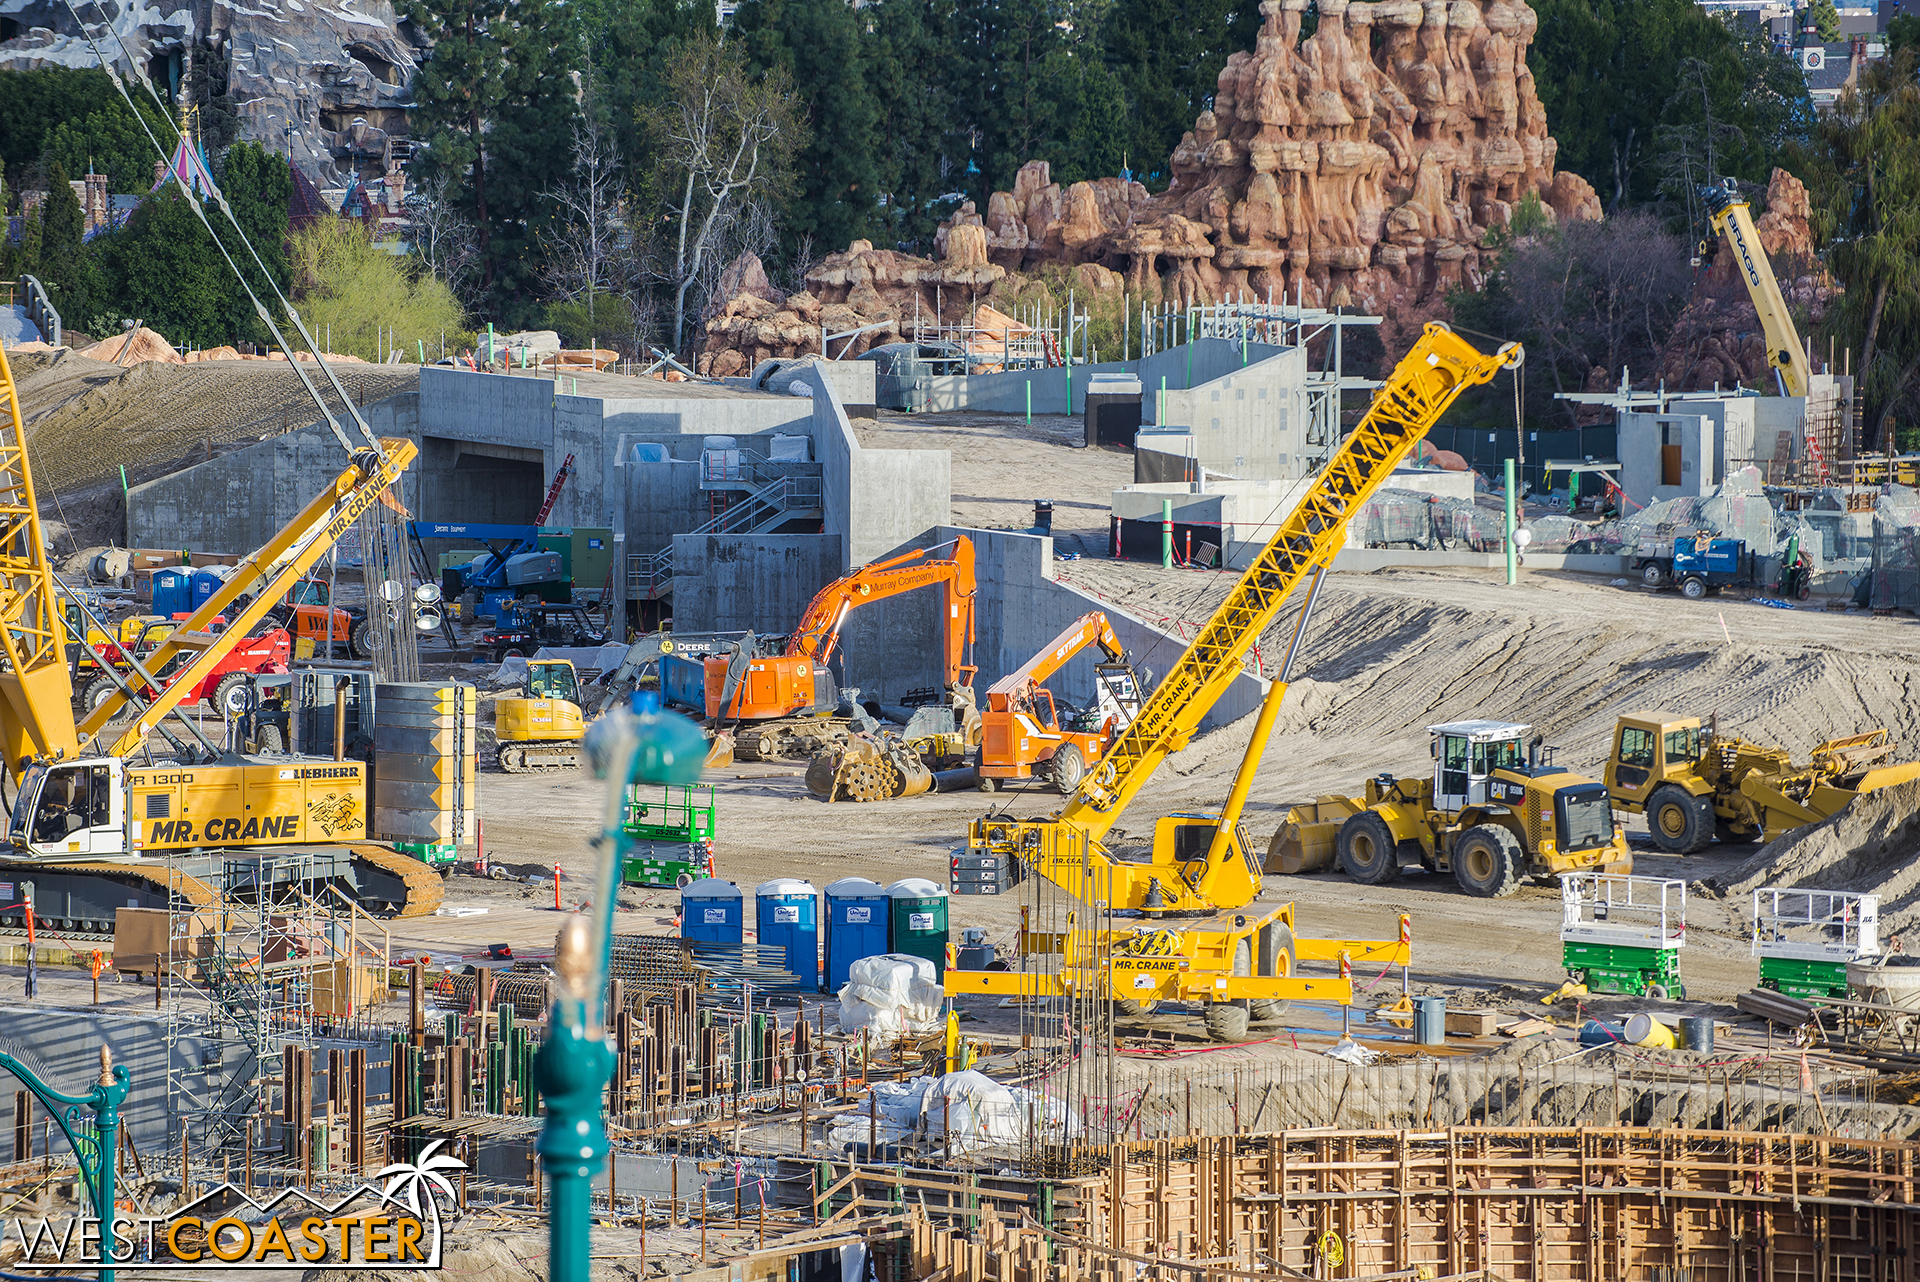  It's going to be pretty nice.&nbsp;  And now we come upon one of the entrances into "Star Wars" Land, plus the service road that will go over the tunnel entrance to link Fantasyland backstage to this area. 